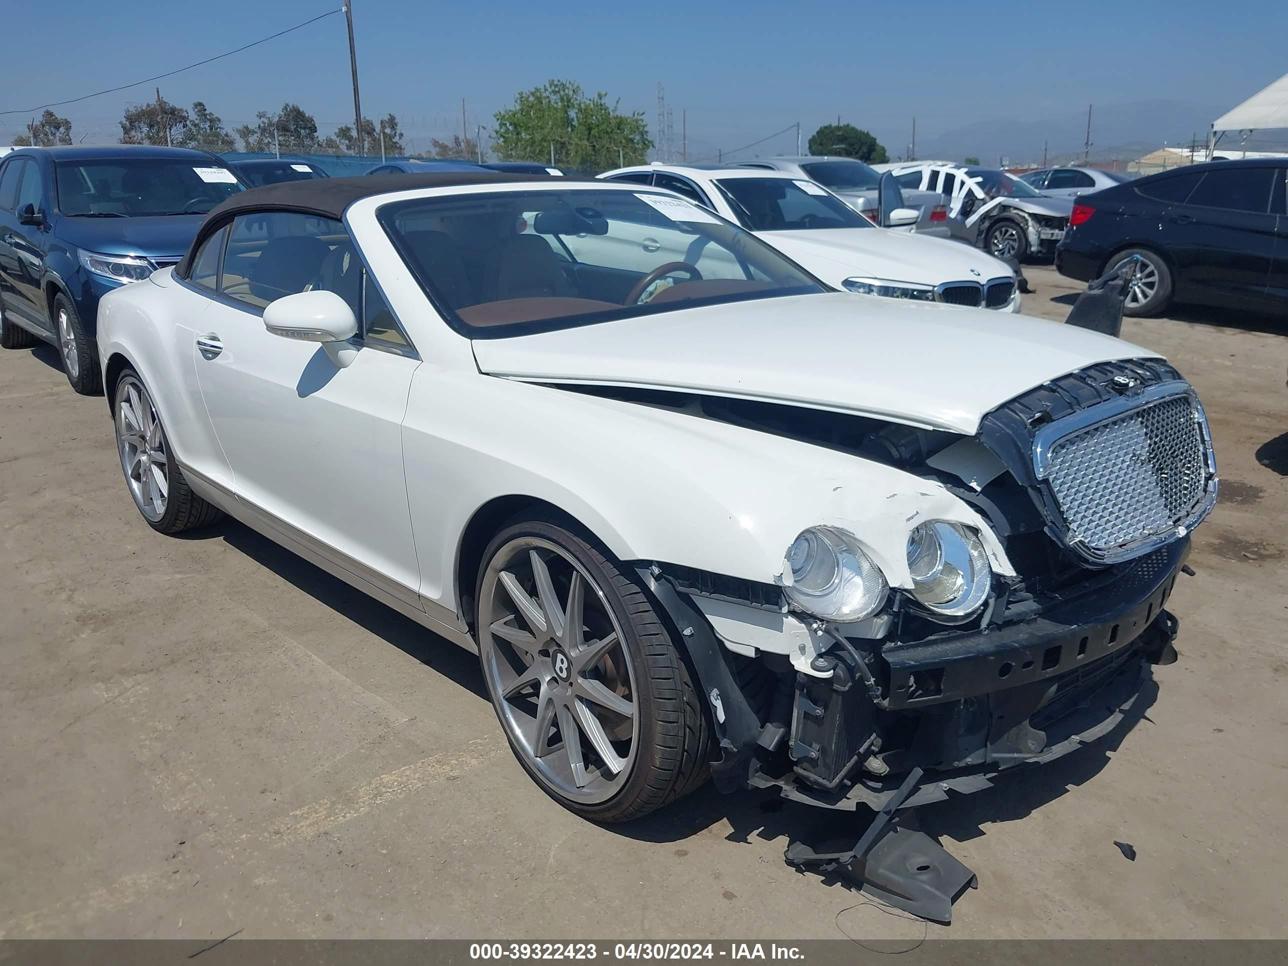 vin: SCBDR33W08C052671 SCBDR33W08C052671 2008 bentley continental gt 6000 for Sale in 91605, 7245 Laurel Canyon Blvd, Los Angeles, California, USA